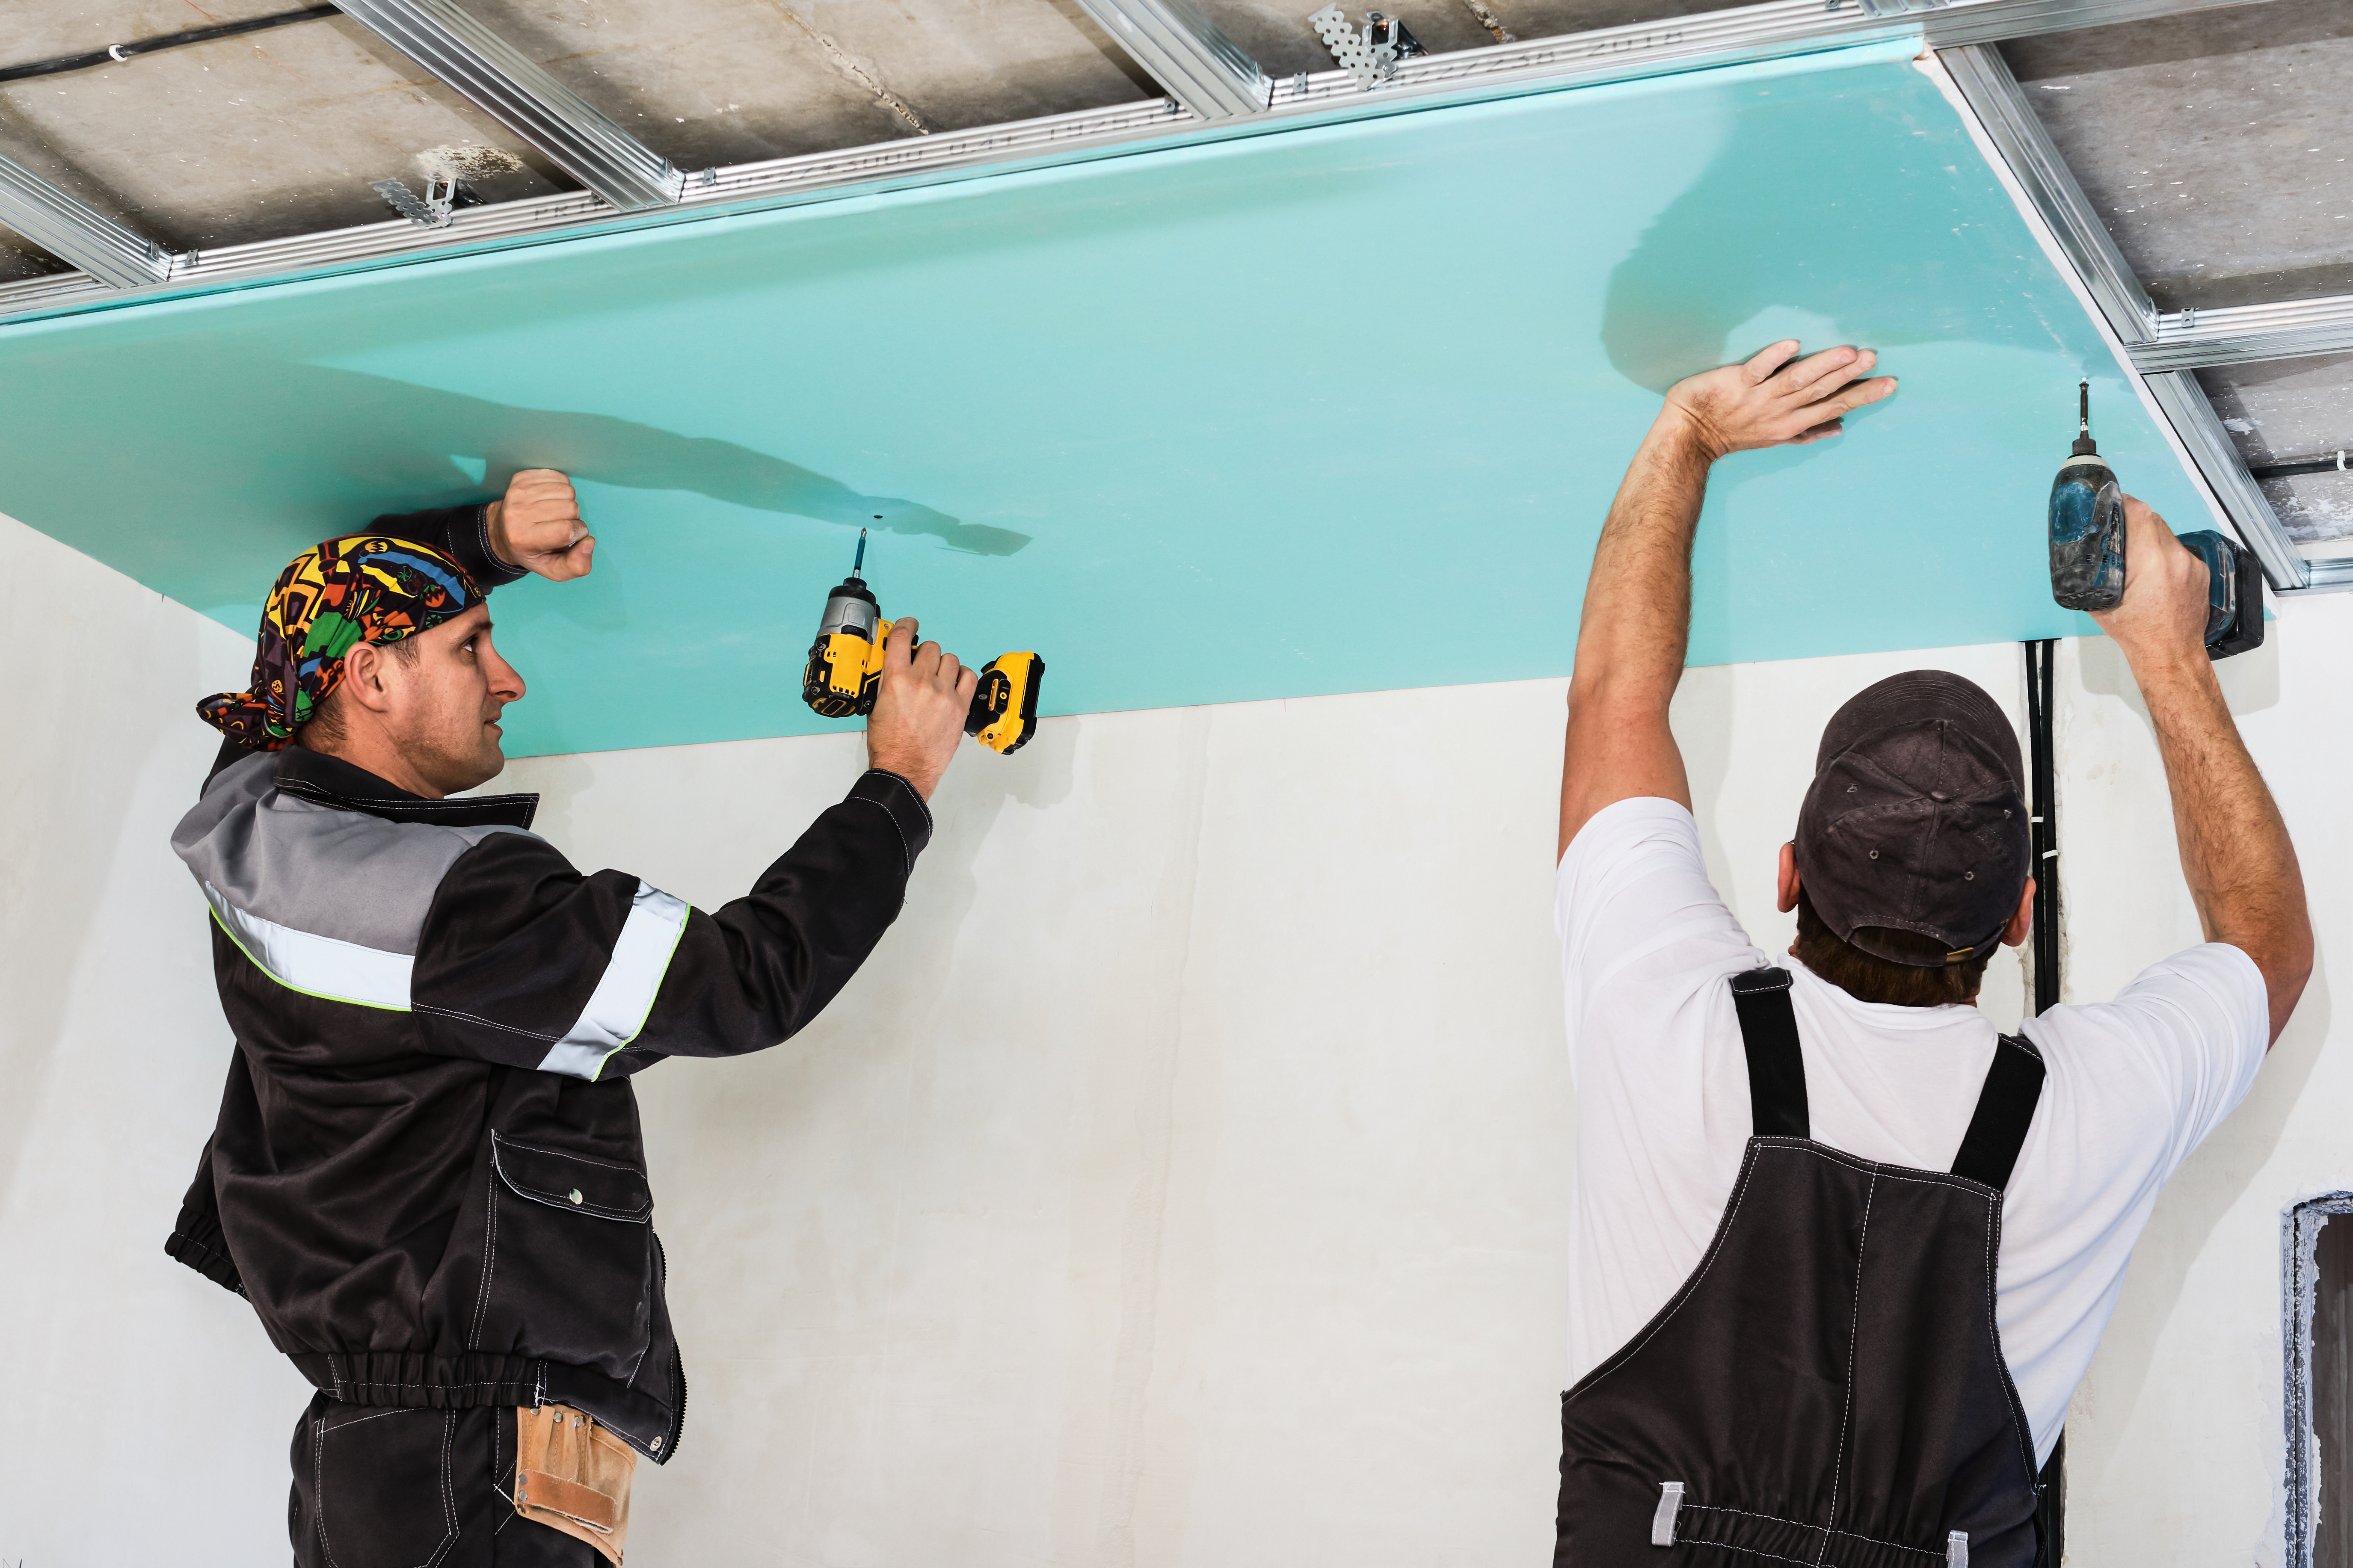 Two installers working for The Best Drywall Contractors In Ottawa. Each are wearing black work coveralls, and are holding a single sheet of drywall against a ceiling, and each are using cordless drills to secure the sheet in place with screws.